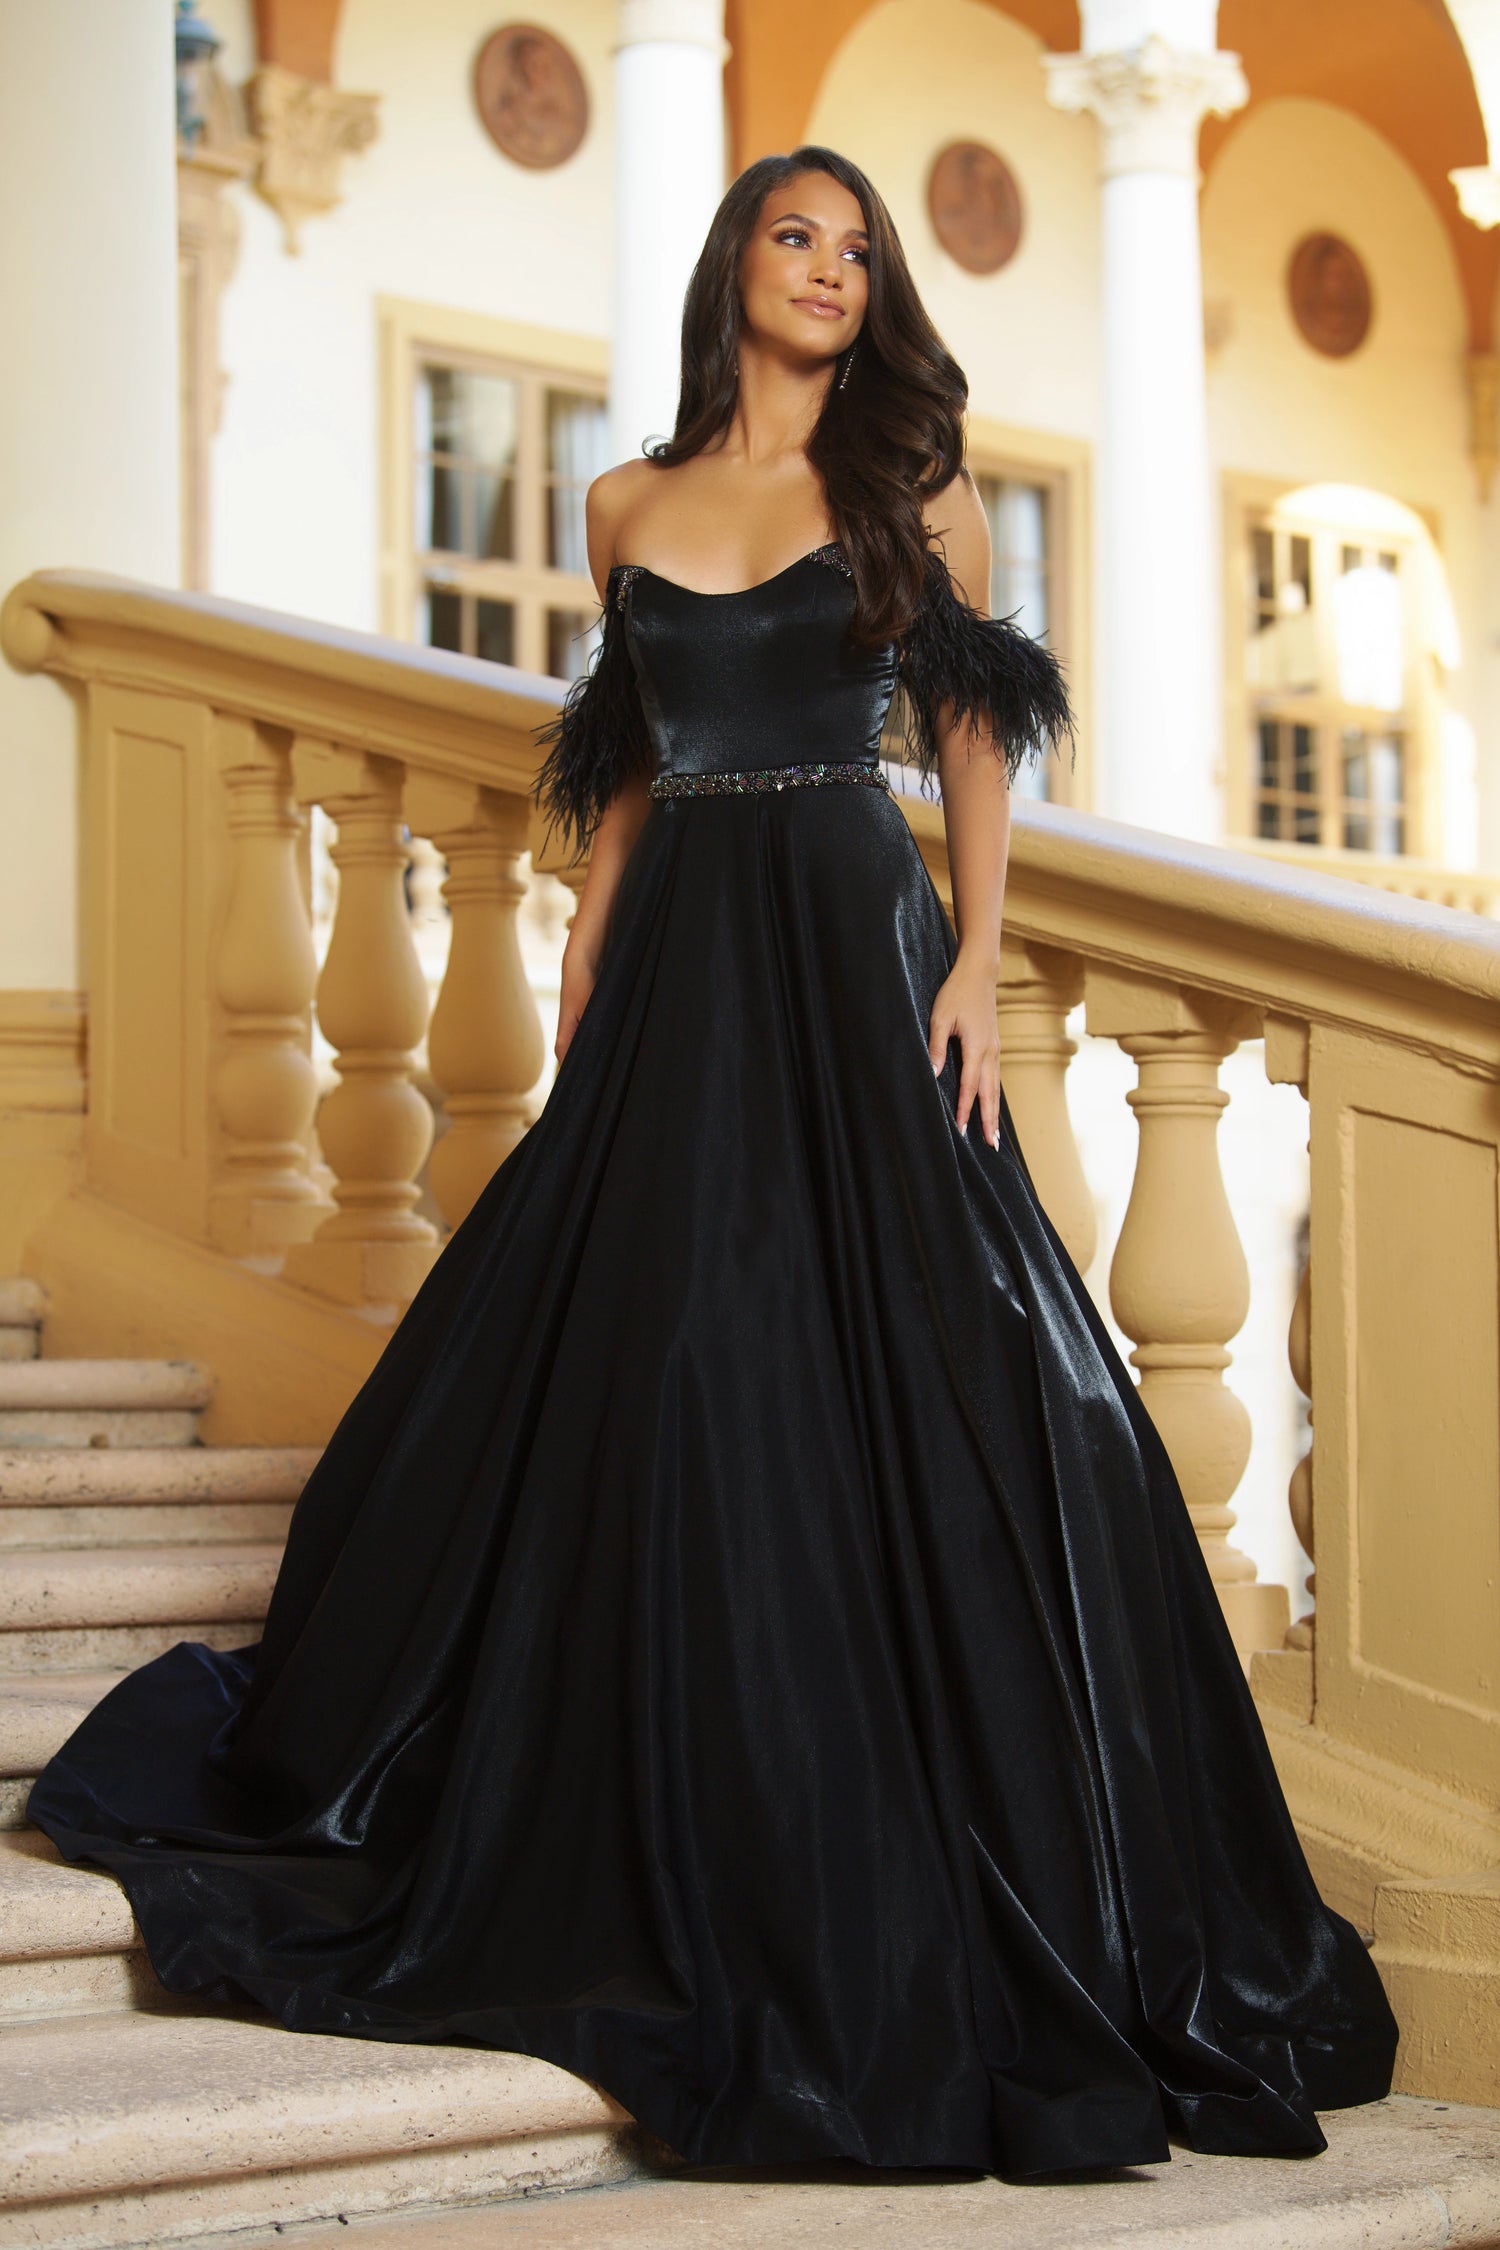 Ava-Presley-28570-black-evening-gown